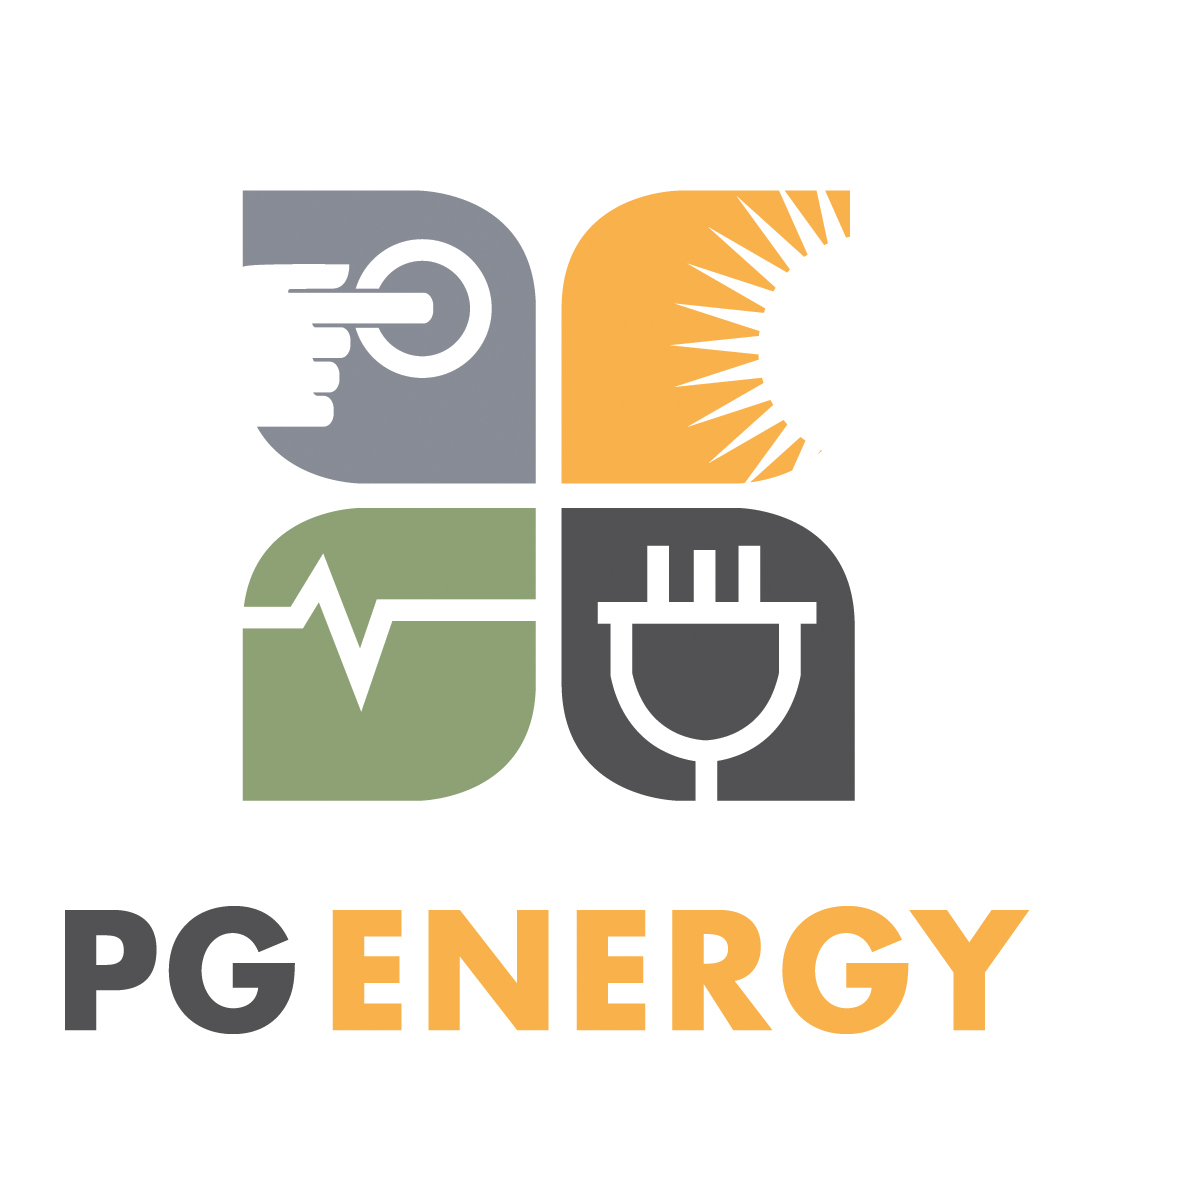 Welcome to our New Affiliate Members - PG Energy